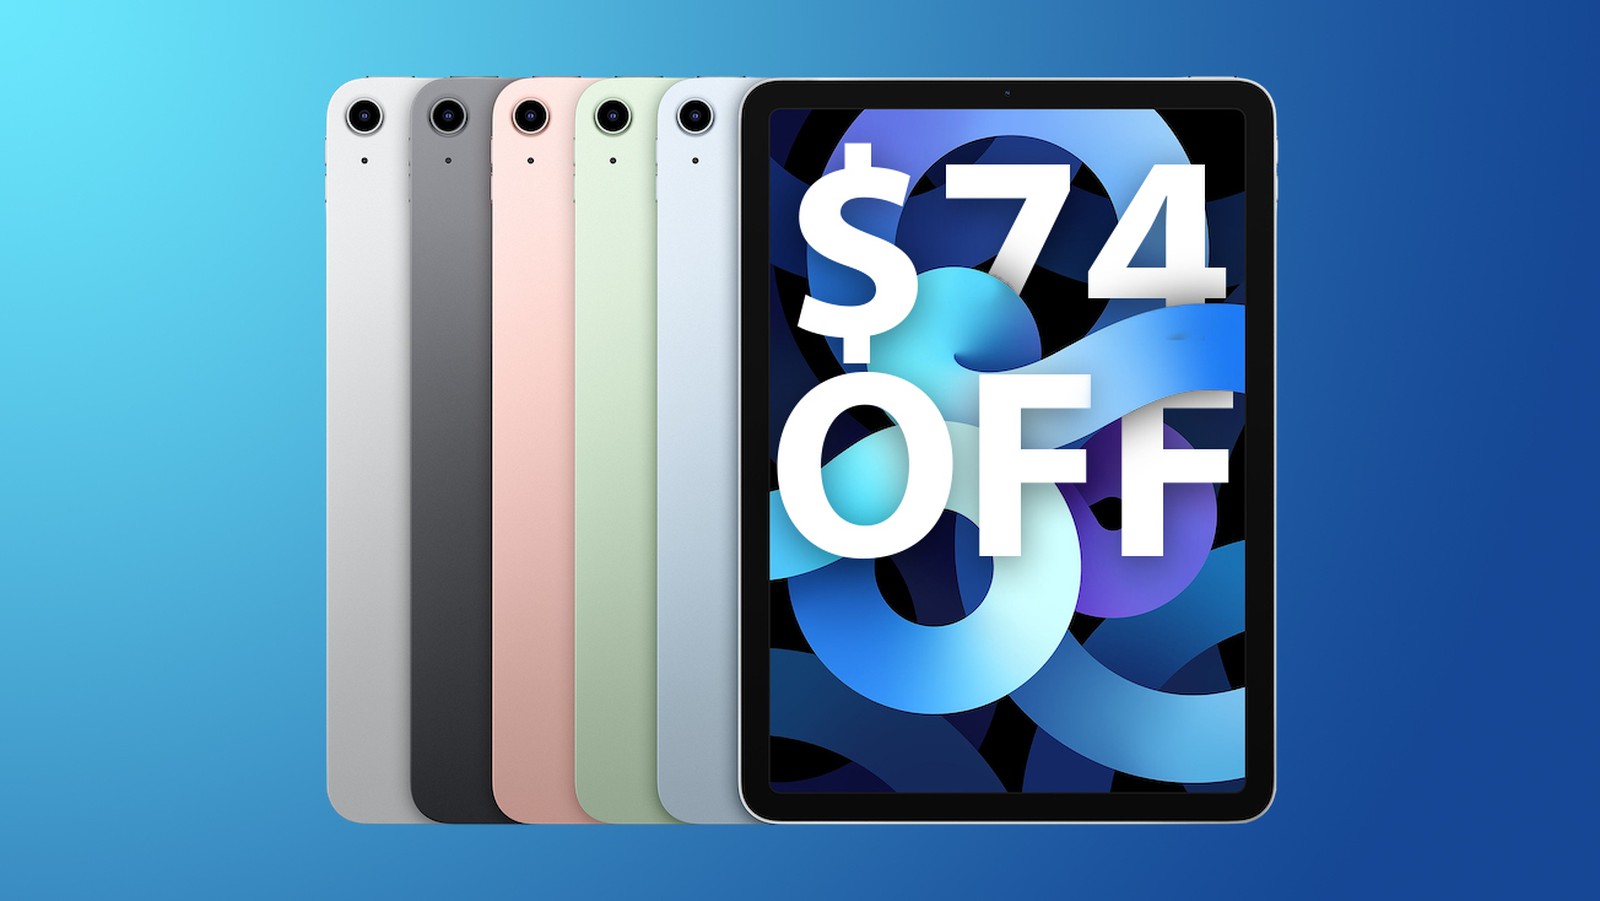 Deals: Save Up to $74 on Apple's 2020 iPad Air, Including 256GB Wi-Fi